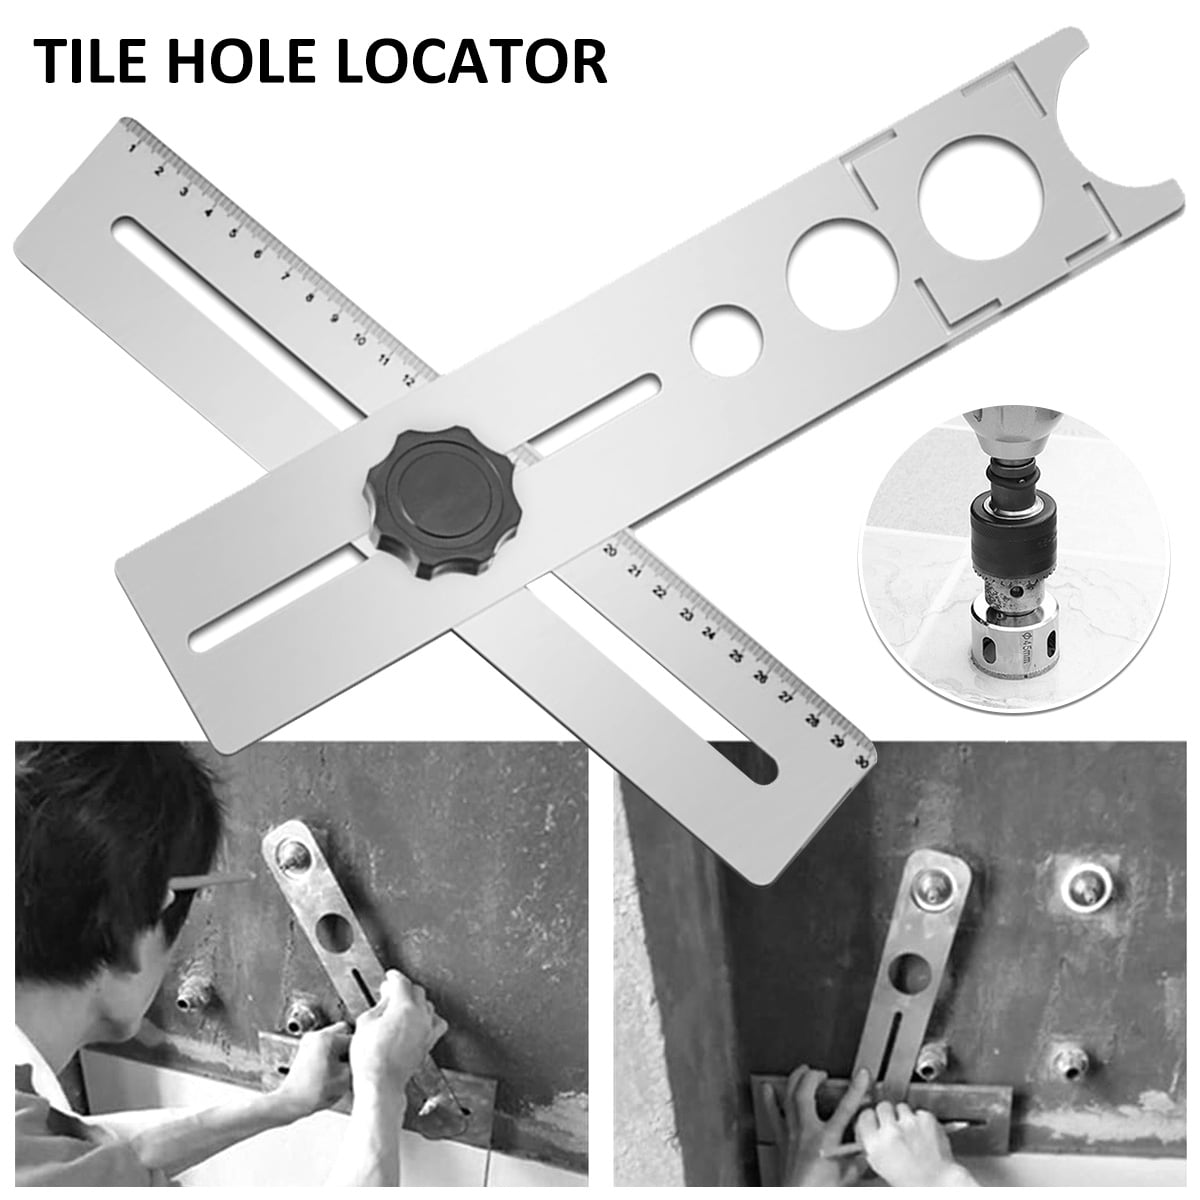 Stainless Steel Ceramic Tile Hole Locator Universal Punching Saw Drill Bit Tools 